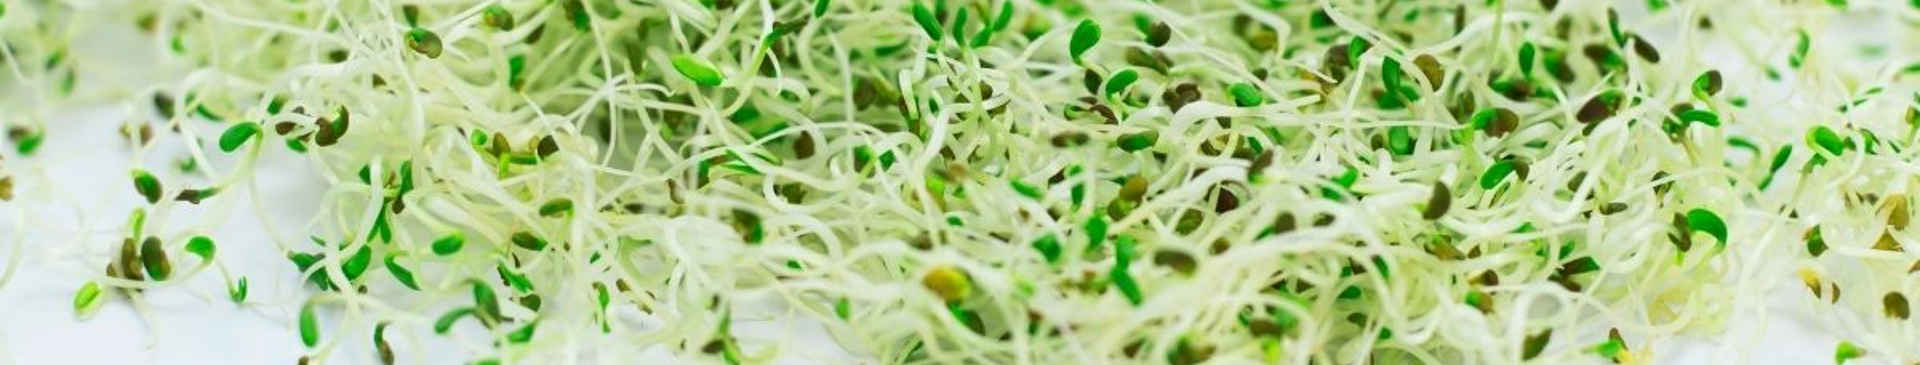 Sprouts: Tasty, Healthy, and Fun to Grow All Year Round